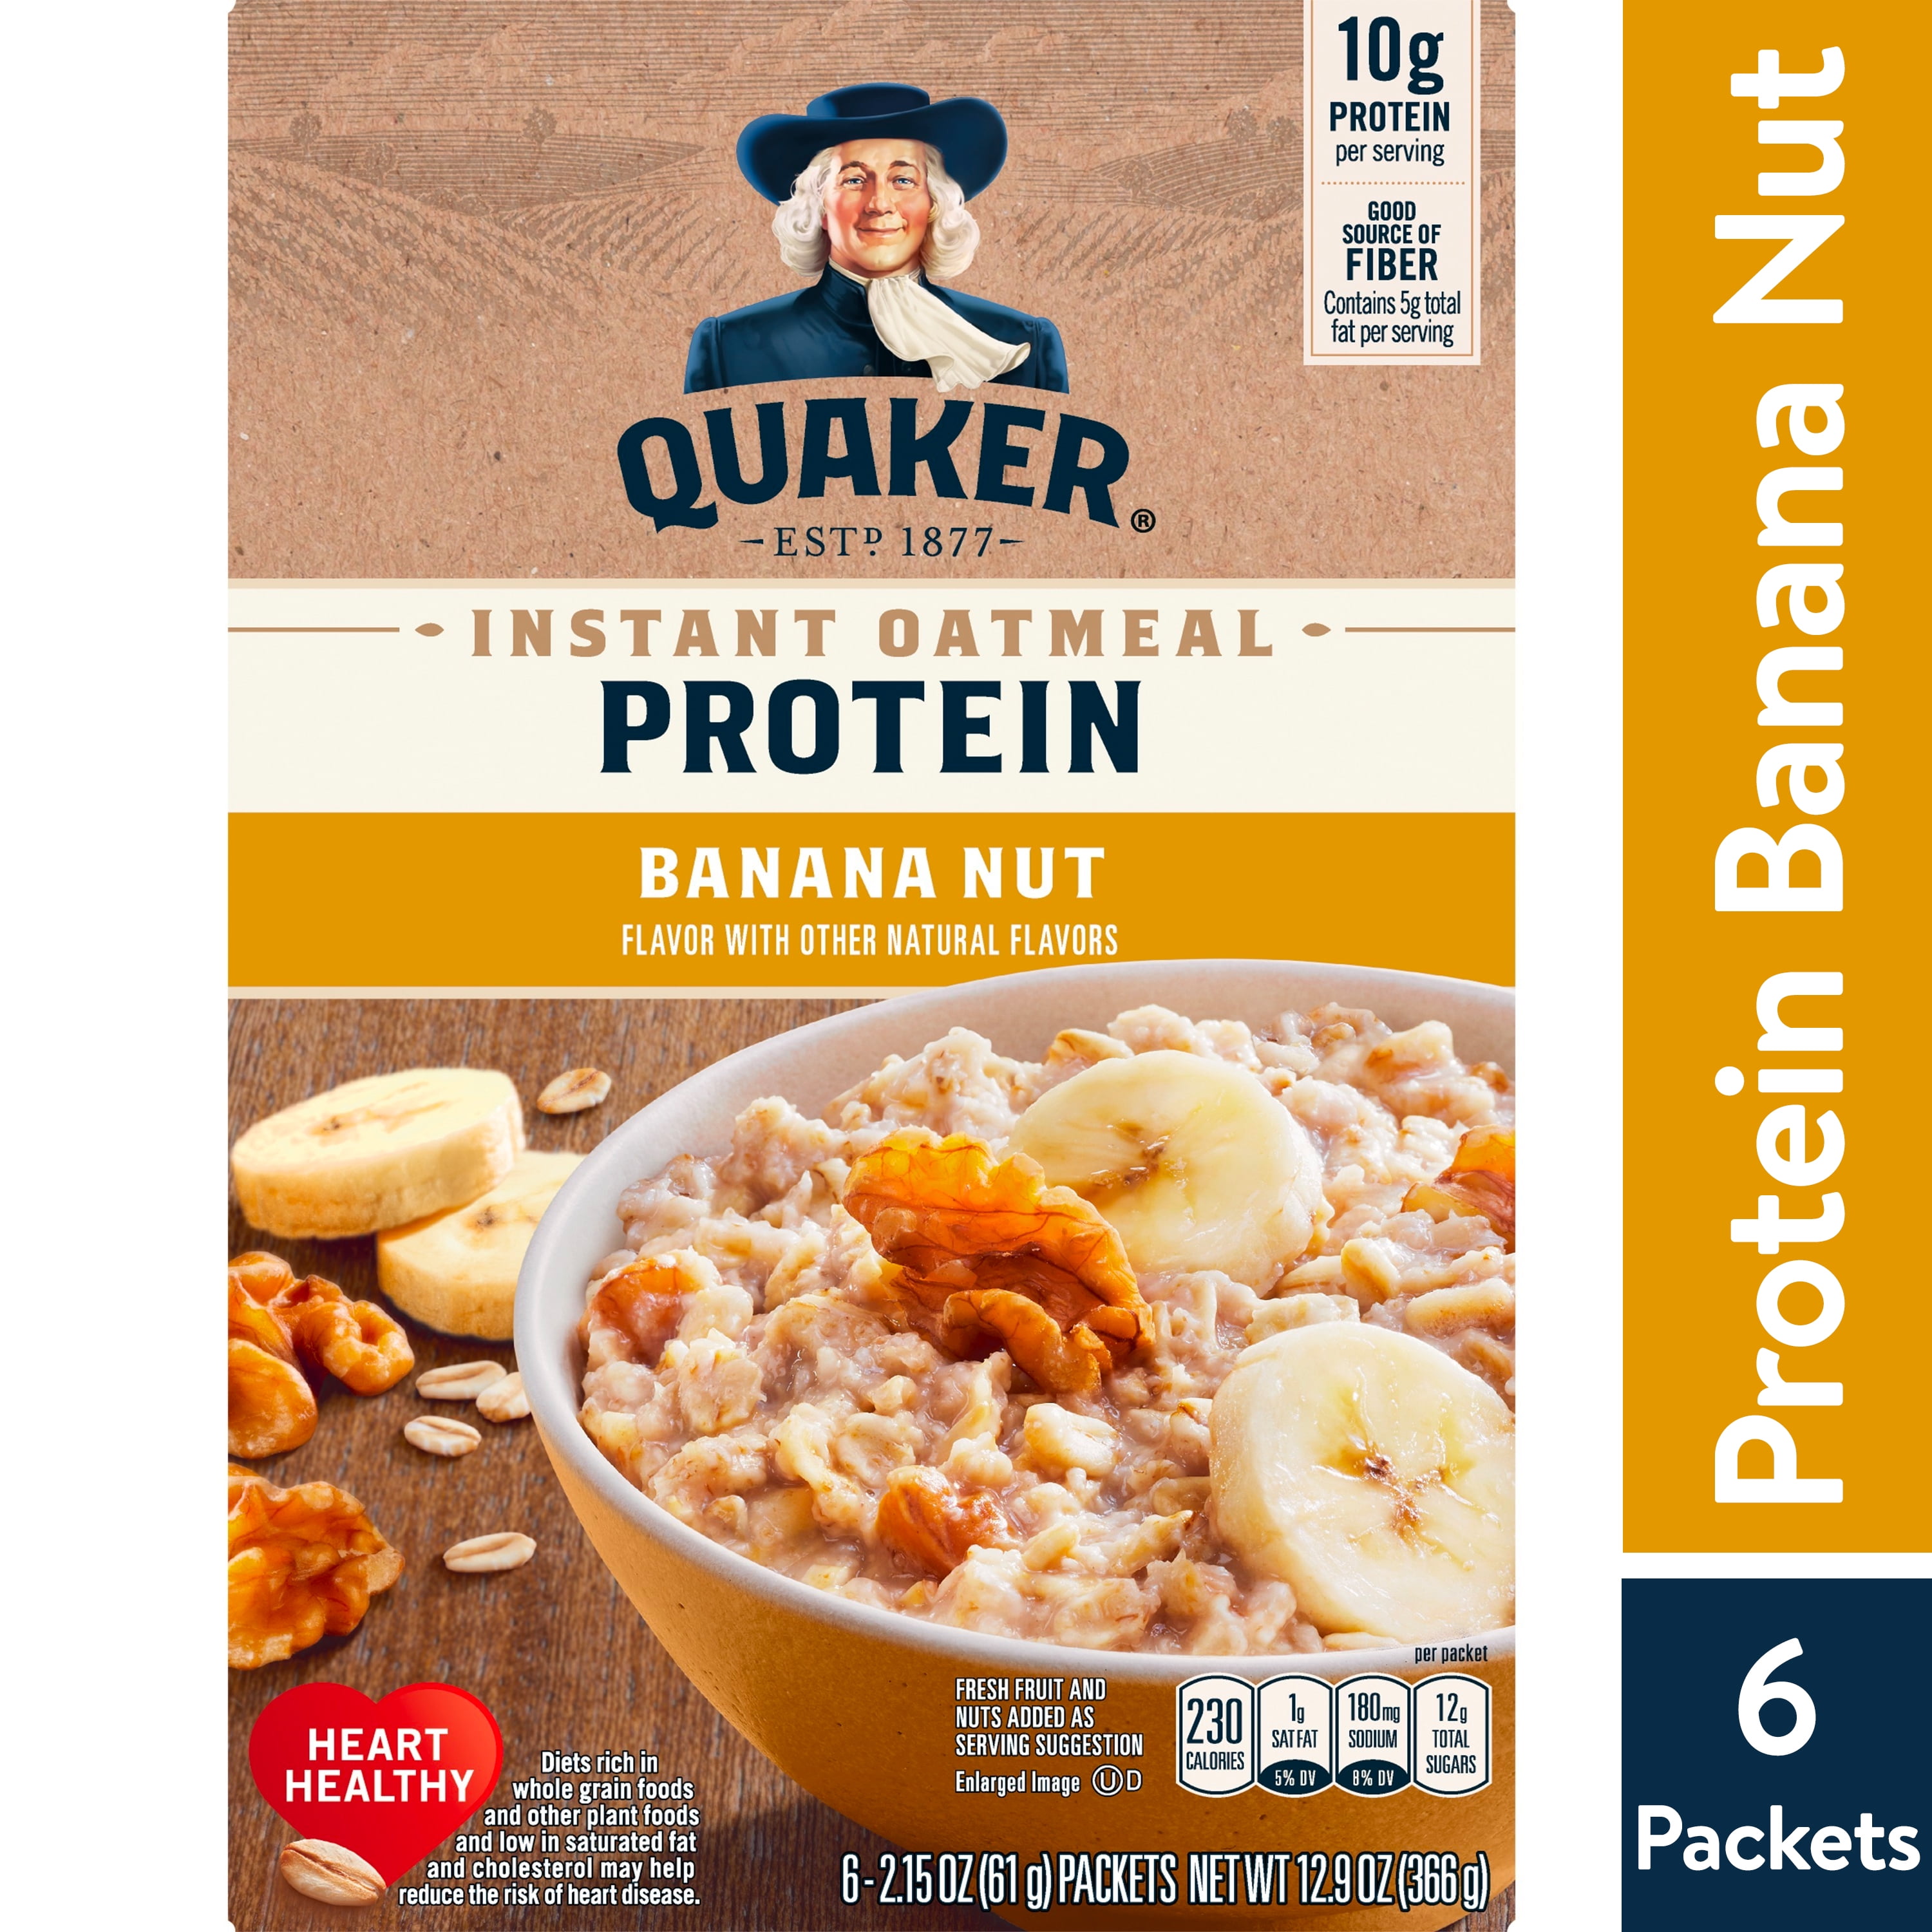 Quaker Select Starts Protein Instant Oatmeal Banana Nut 2.15 Oz 6 Count